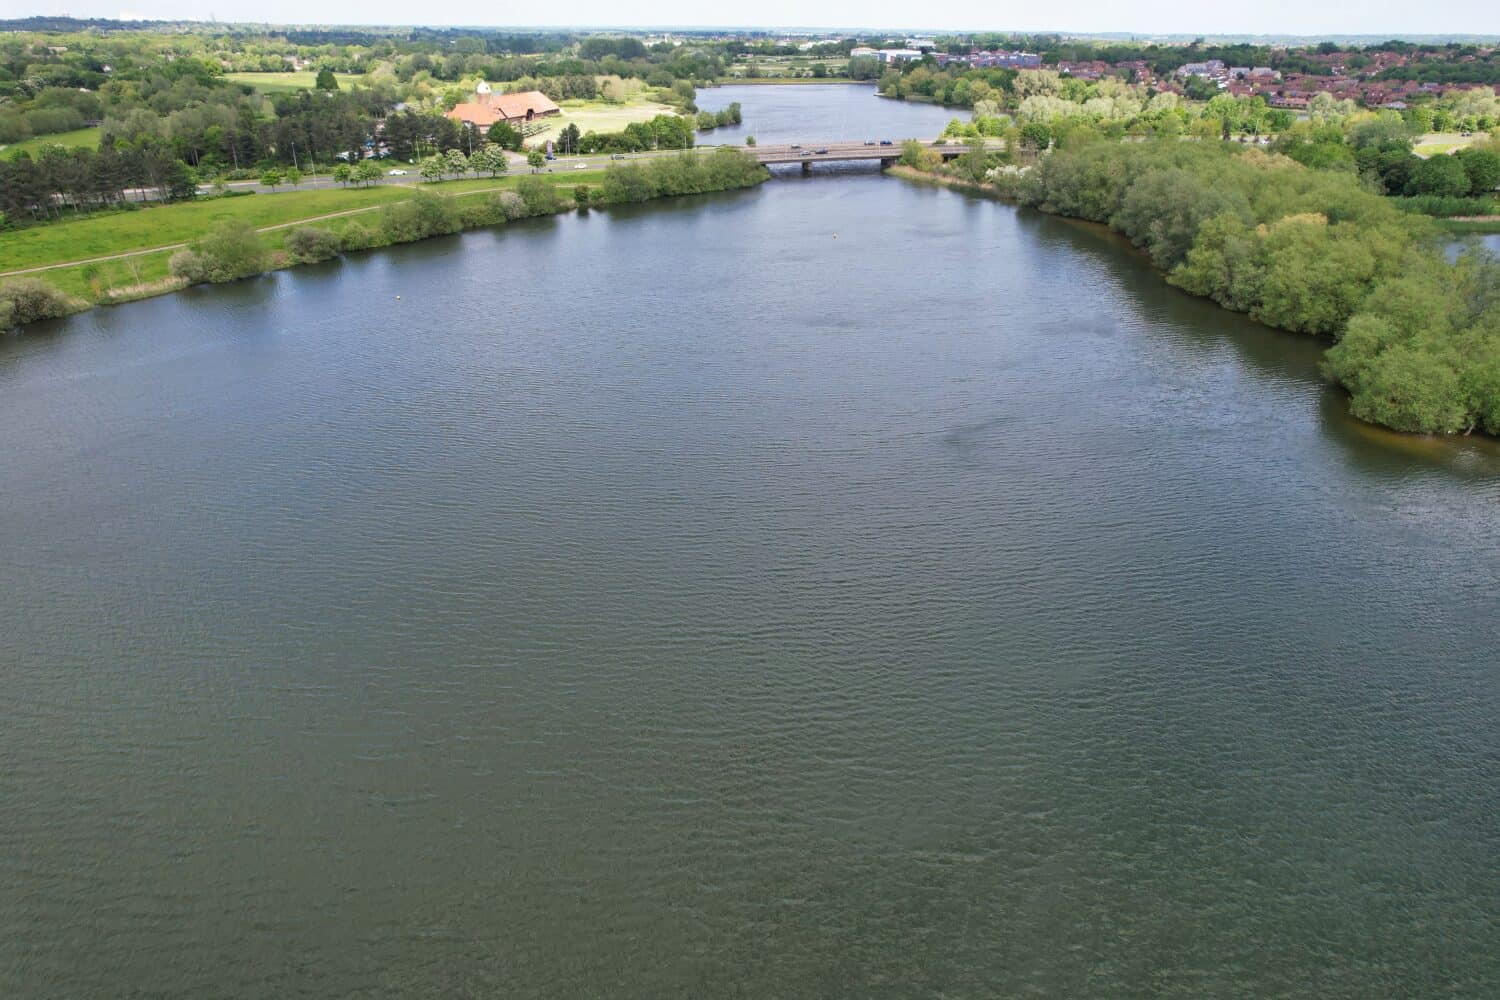 Gorgeous Aerial View of Caldecotte Lake of Milton Keynes City of England Great Britain During Dramatic Clouds over City and Warm Day. The Footage Was Captured on 21-May-2023 with Drone's Camera.